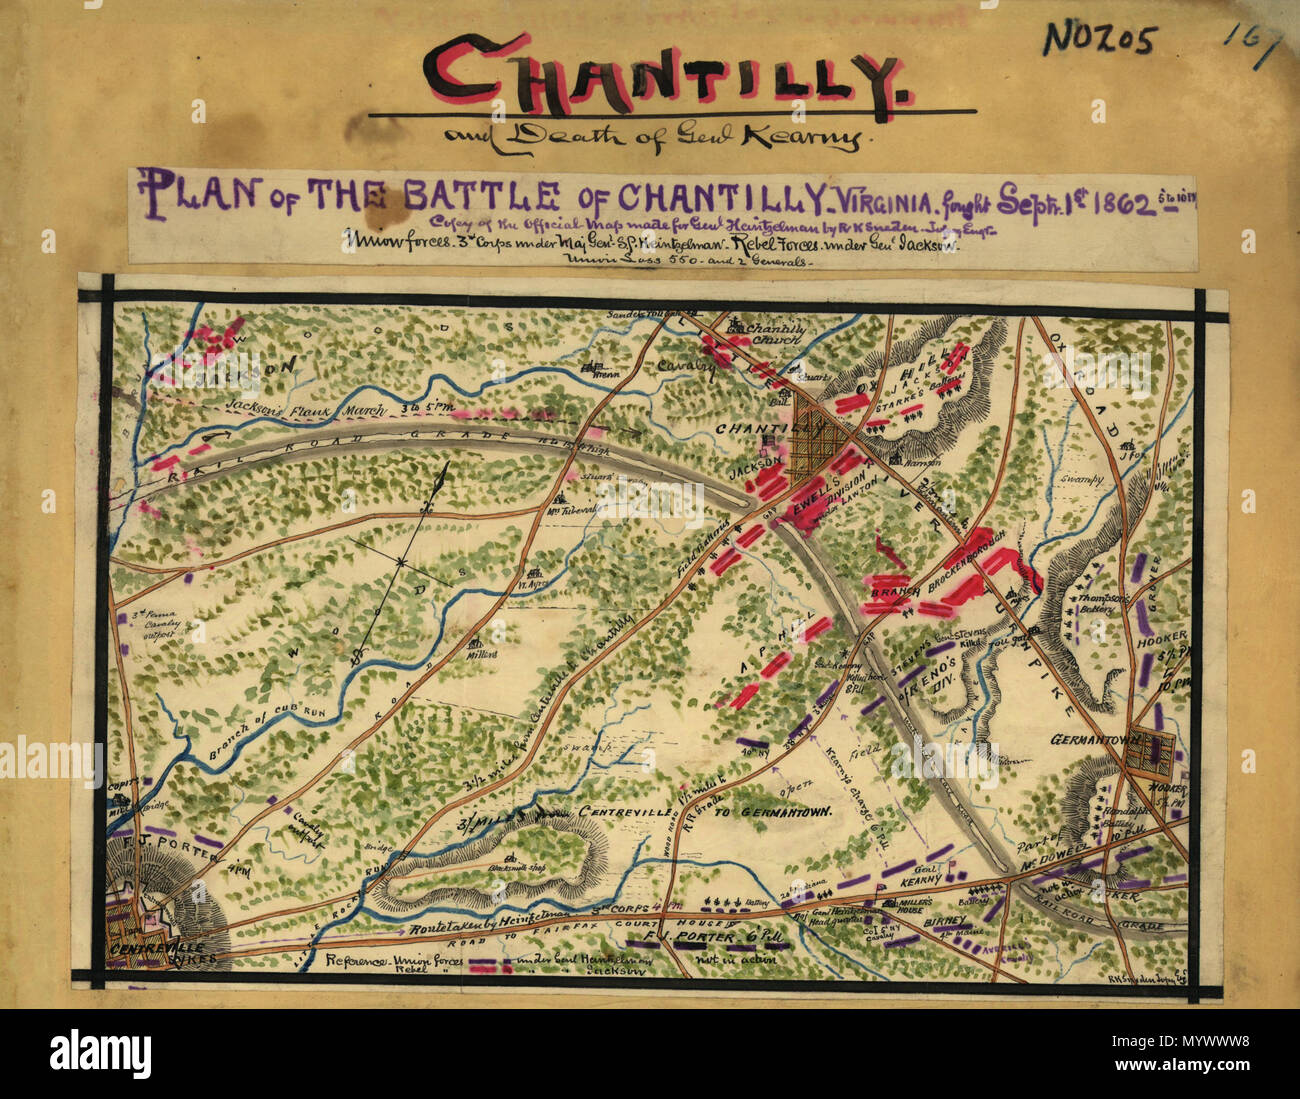 . Map of the Battle of Chantilly (also known as the Battle of Ox Hill) on September 1, 1862, depicting events from 5 to 10 PM.  . between circa 1862 and circa 1865.   Robert Knox Sneden  (1832–1918)     Description American drawer and cartographer  Date of birth/death 1832 1918  Location of birth/death Annapolis Royal Bath  Work location New York City  Authority control  : Q7346431 VIAF:?60311076 ULAN:?500343090 LCCN:?n00035674 NLI:?000123931 WorldCat 14 BattleOfChantillyMap Stock Photo